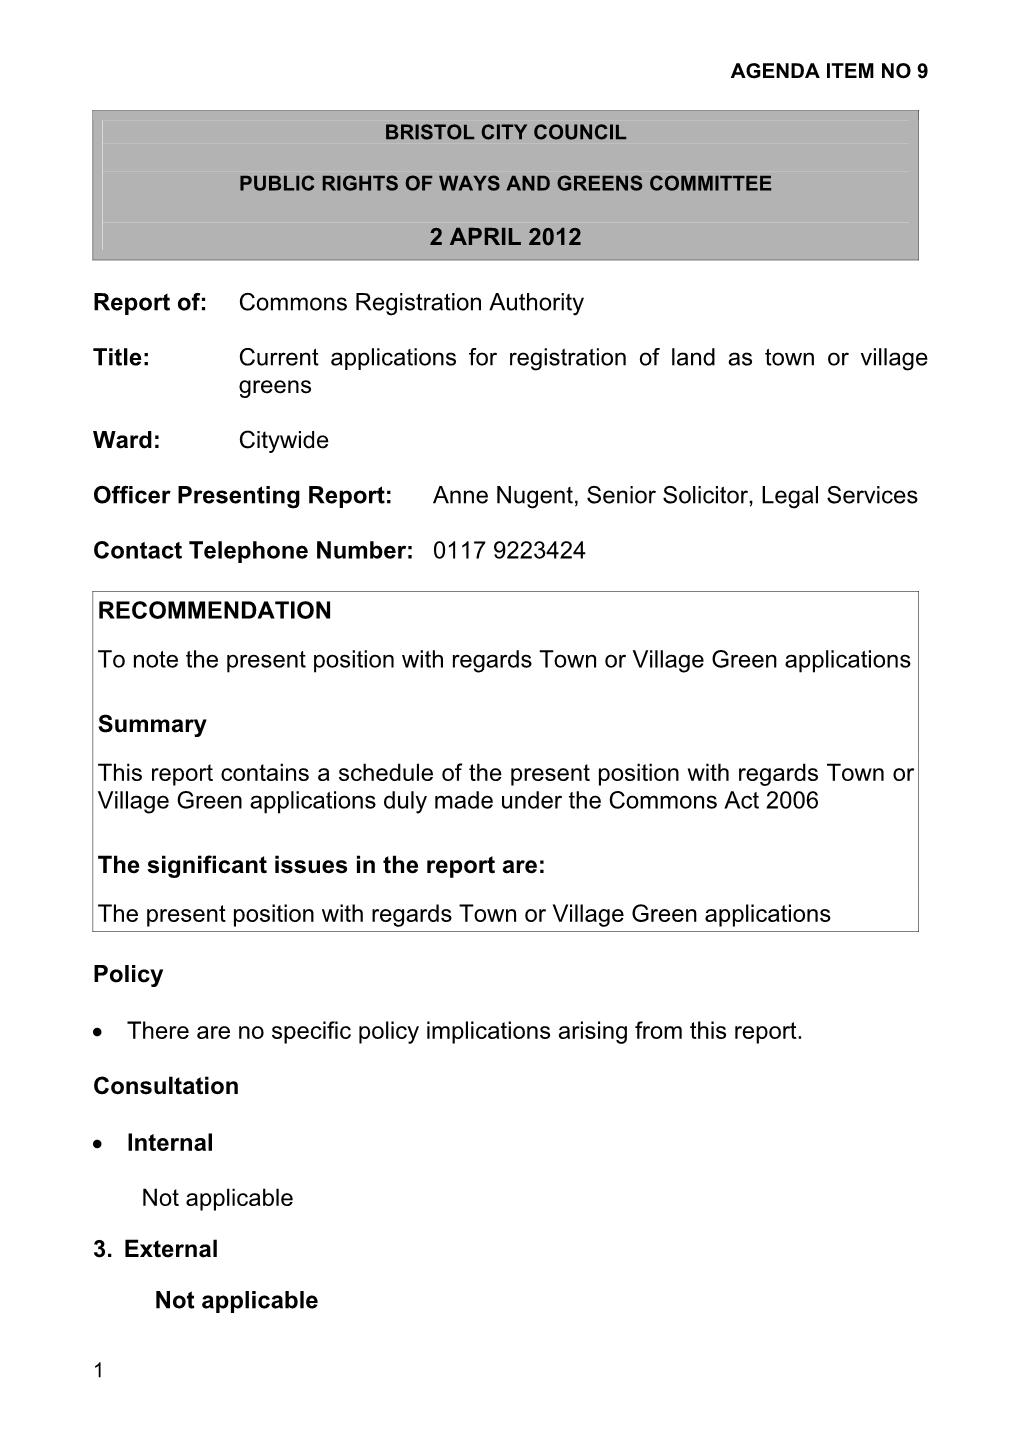 Current Applications for Registration of Land As Town Or Village Greens